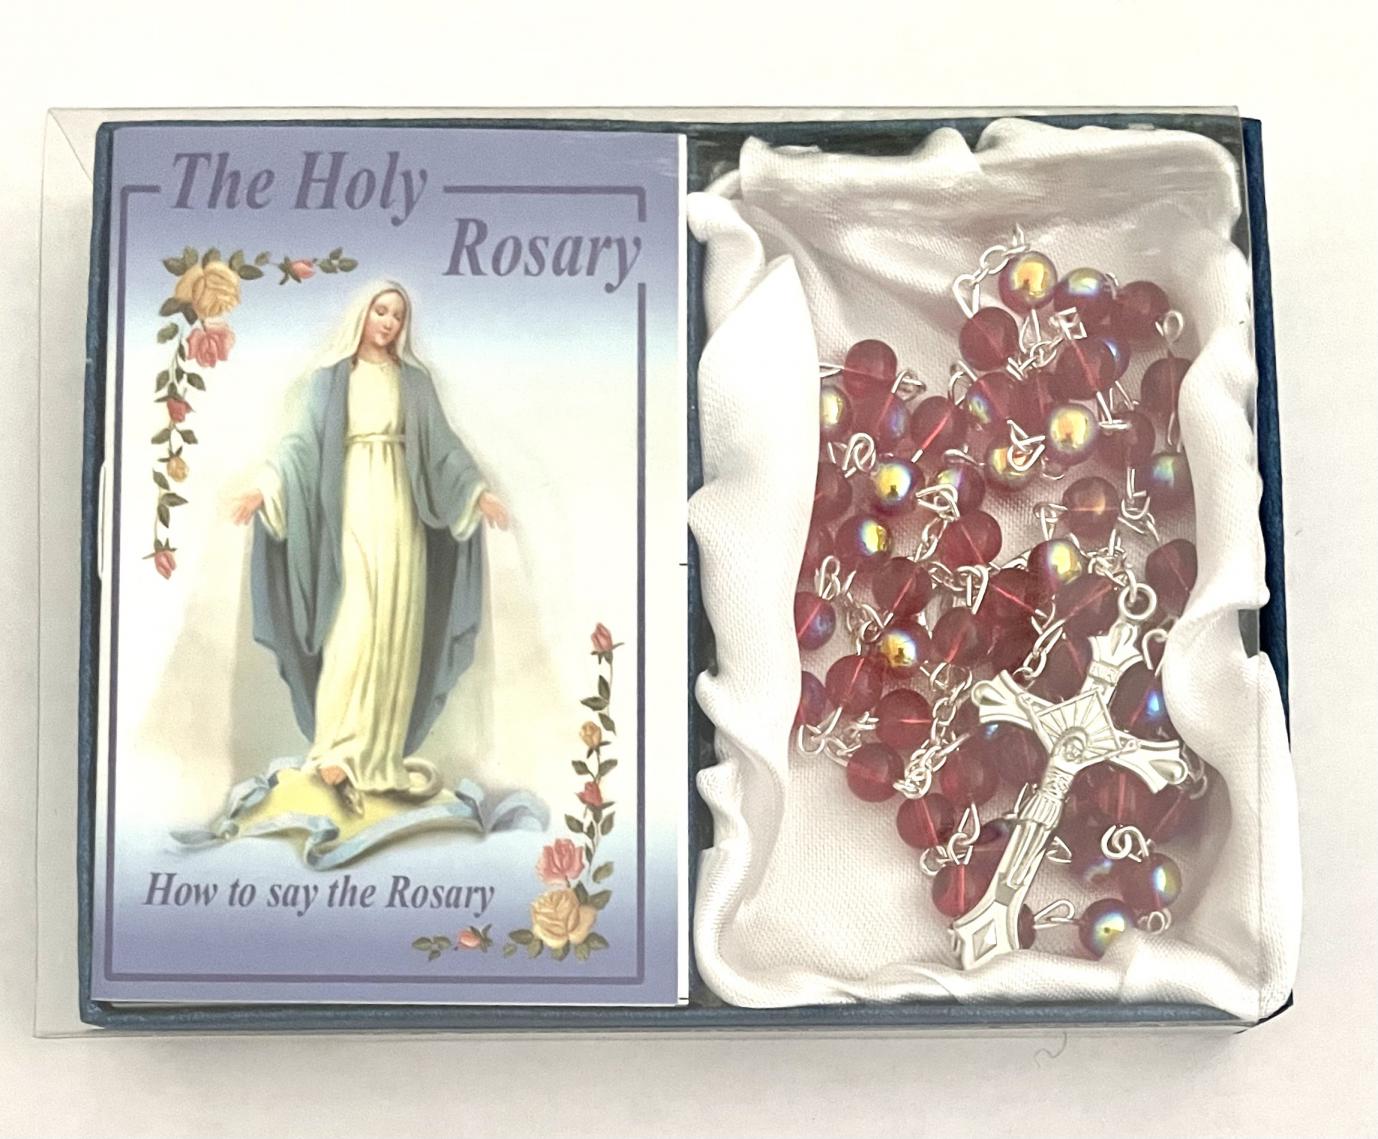 6mm Ruby Rosary with How To Say The Rosary Booklet in Blue Box